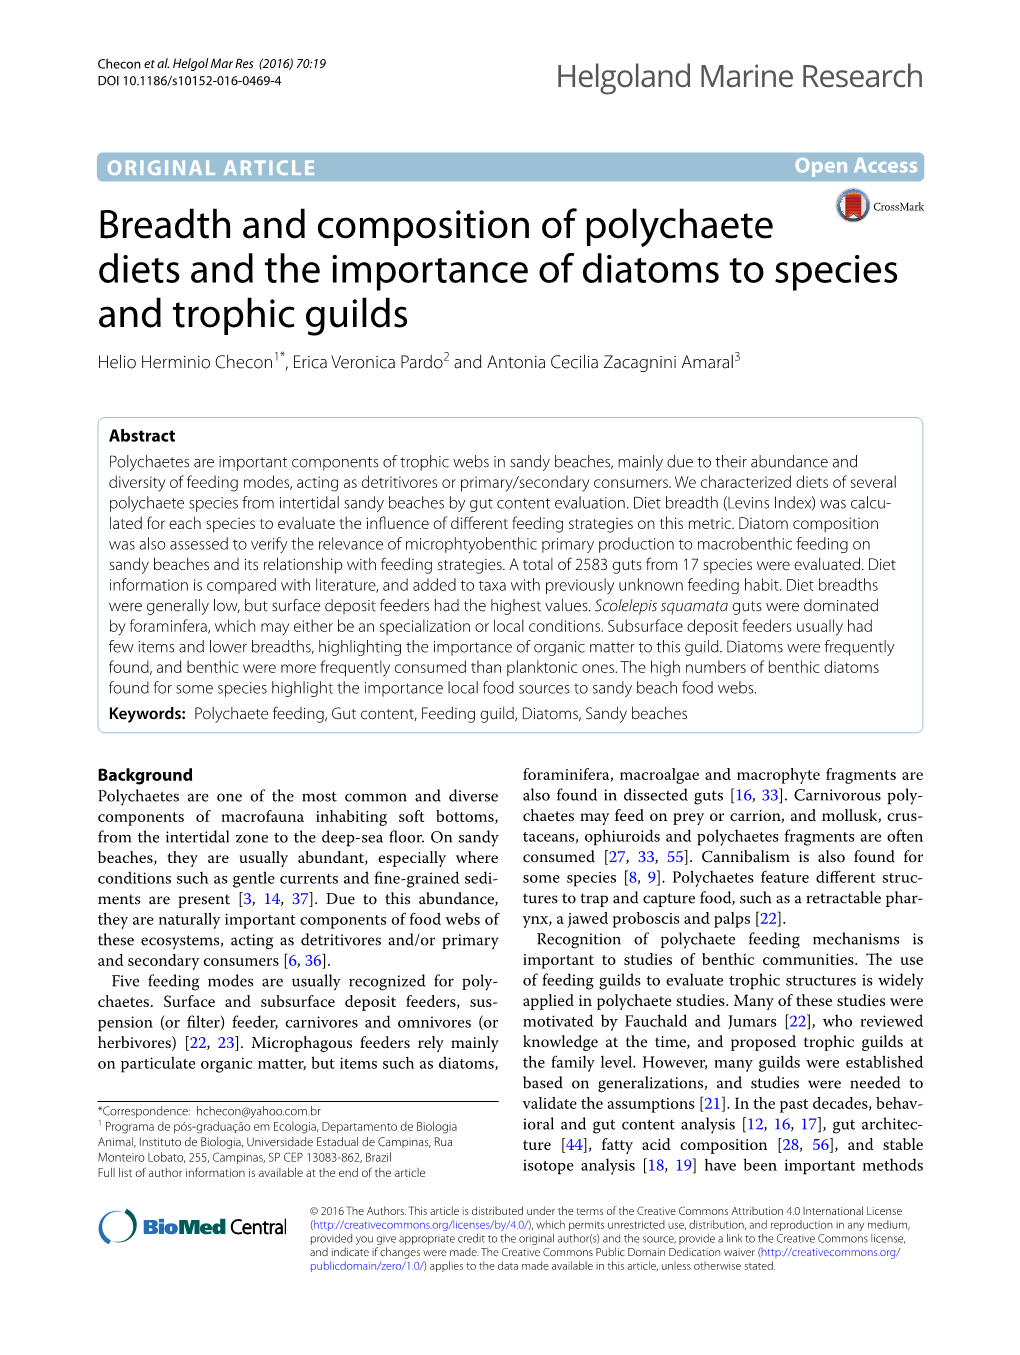 Breadth and Composition of Polychaete Diets and The